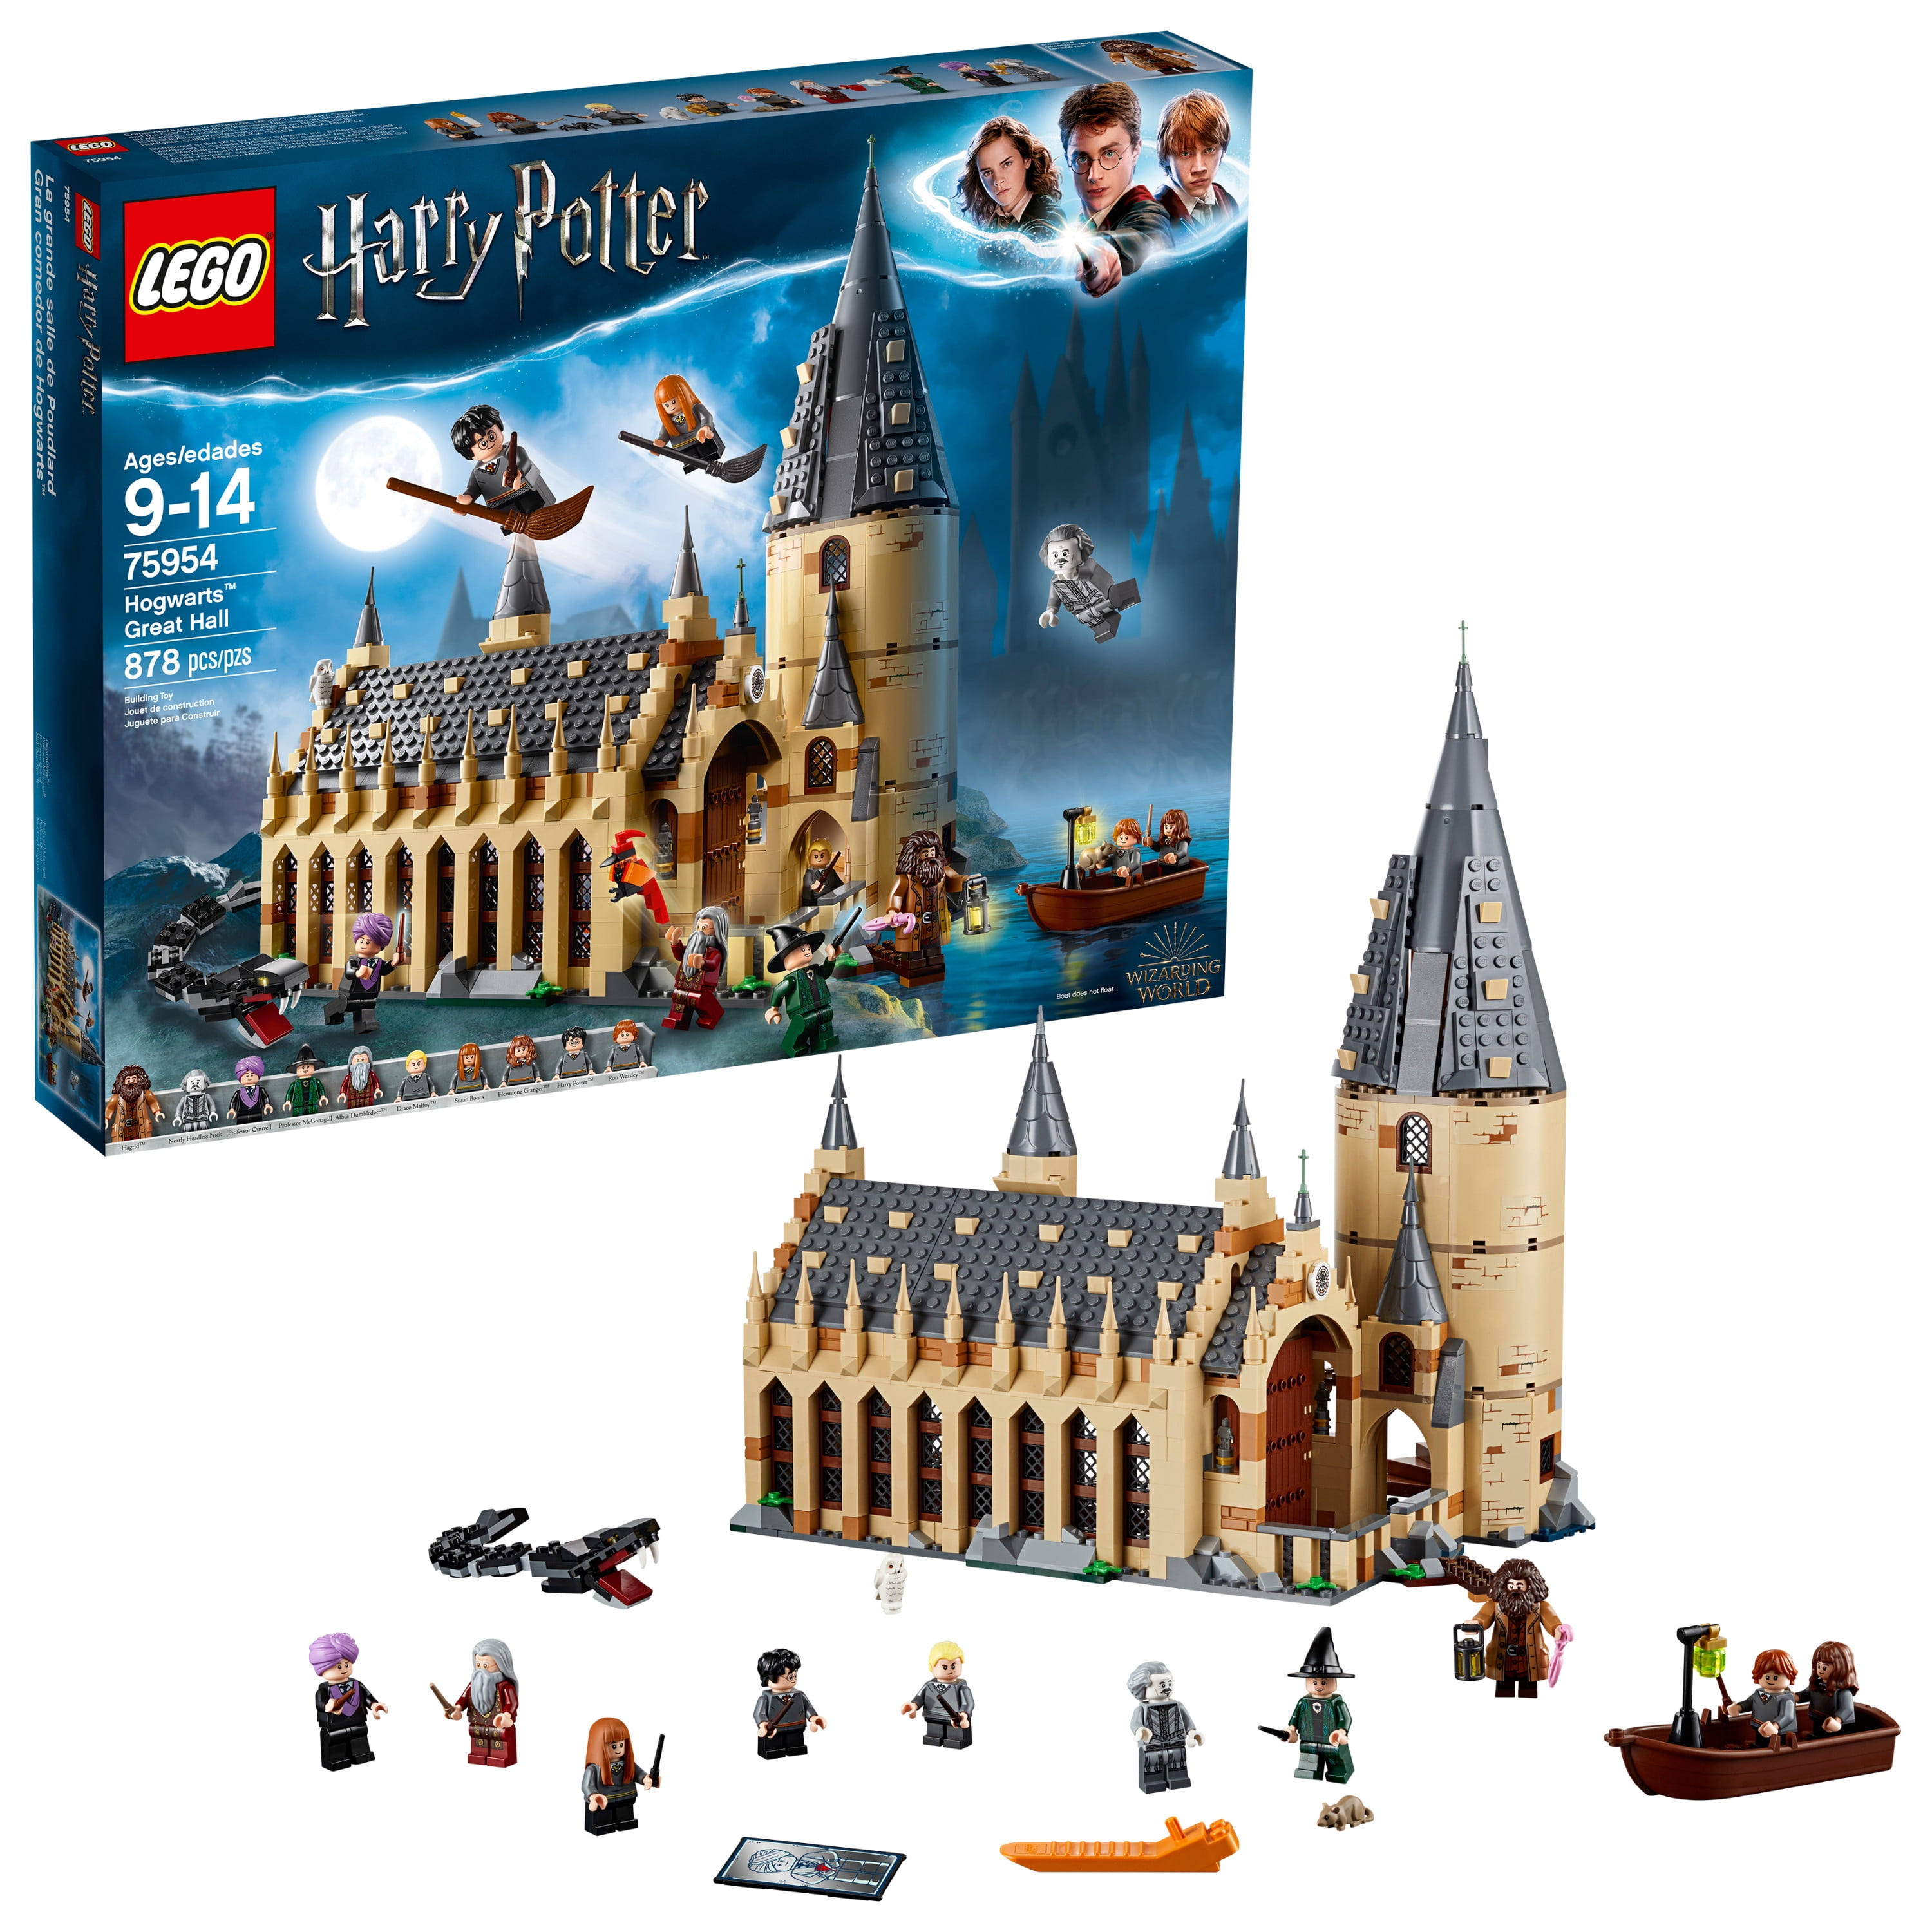 Harry Potter Hogwarts Great Hall Castle Deluxe Playset Mini Toy Gift 2019 NEW 